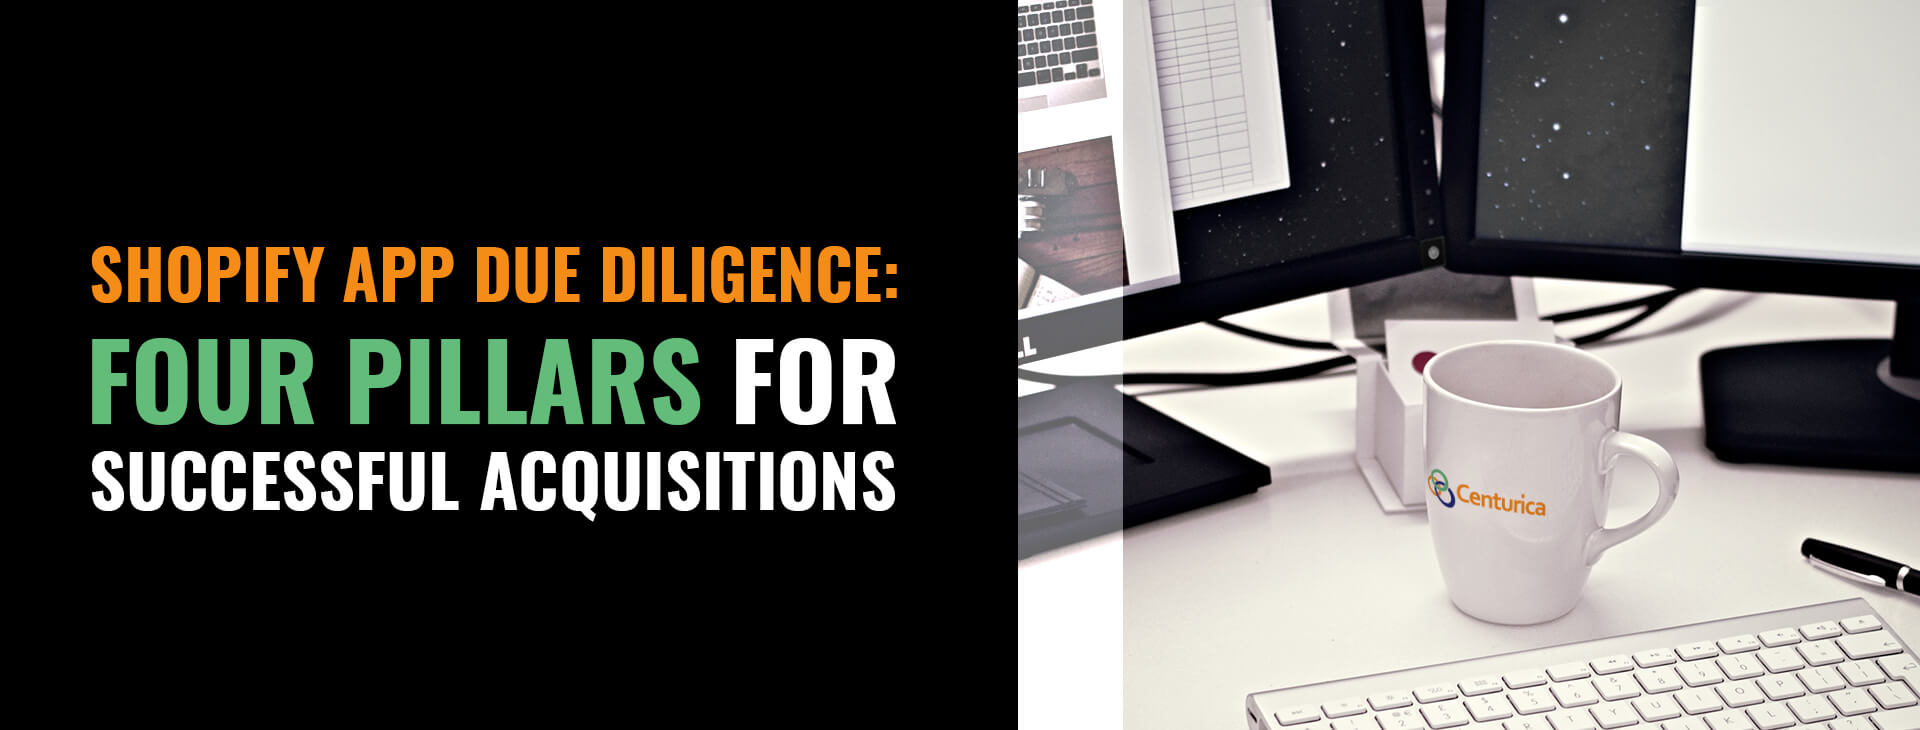 Shopify App Due Diligence: Four Pillars For Successful Acquisitions